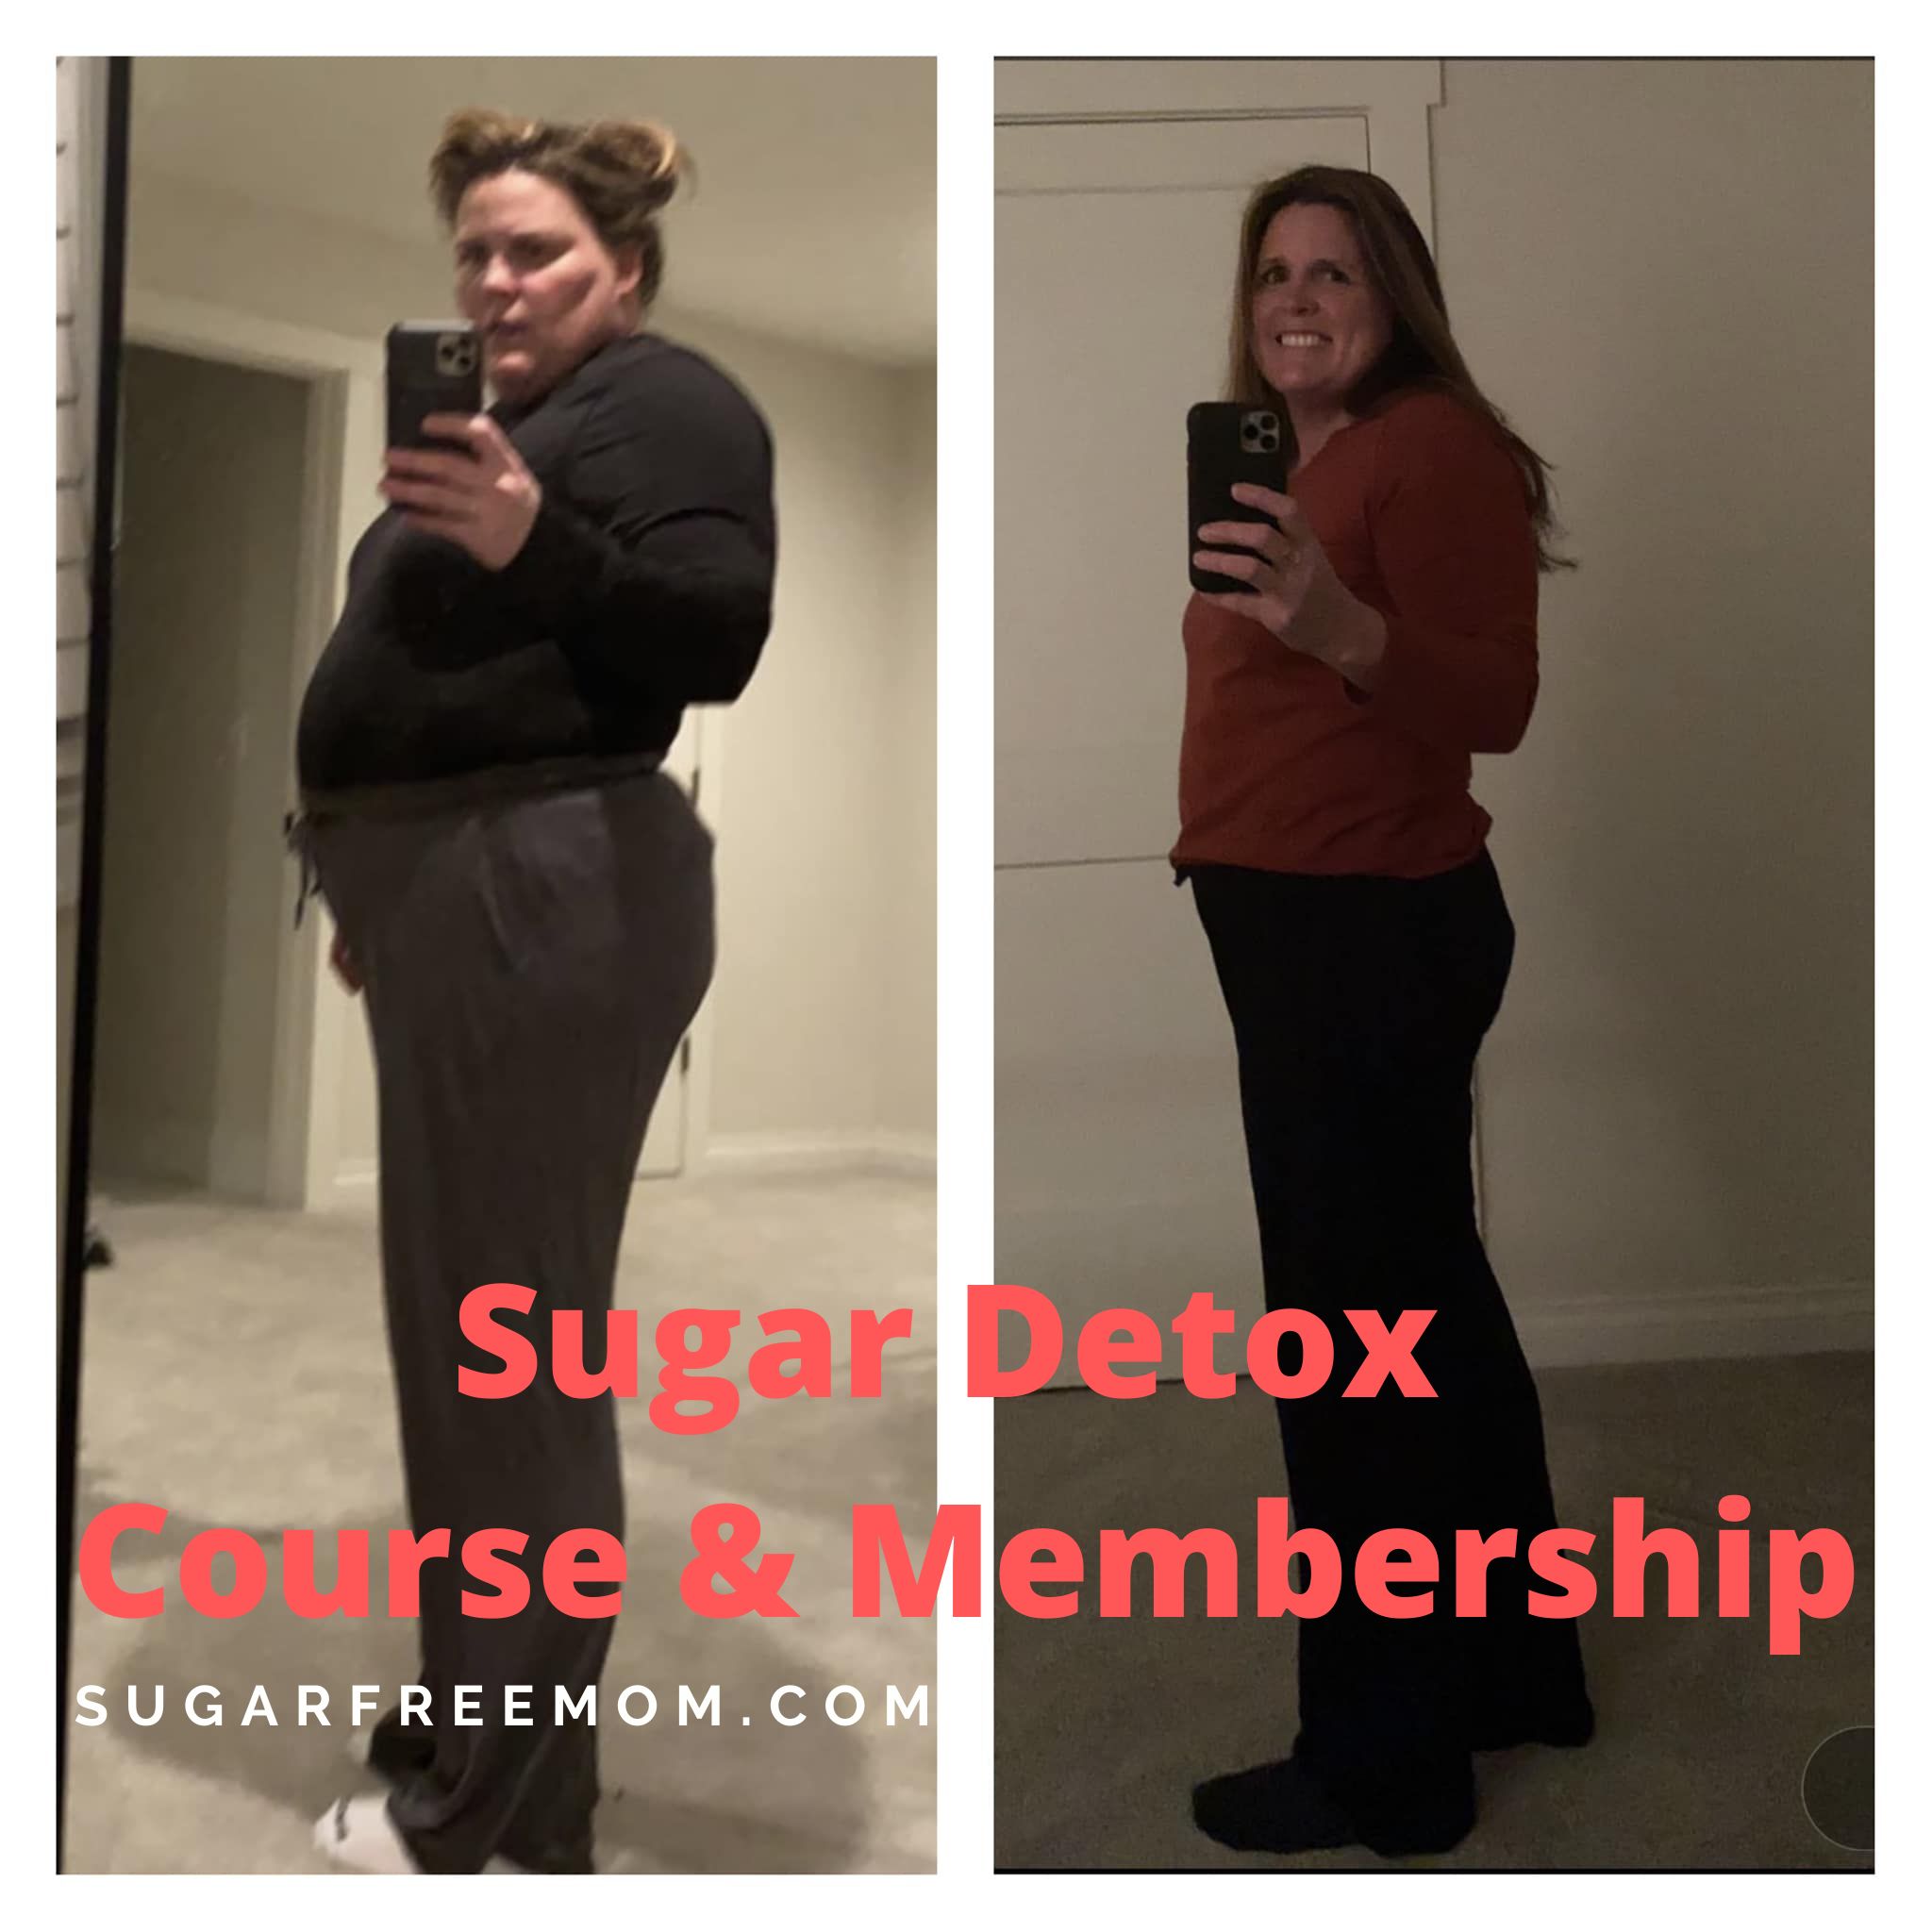 LIVE Coaching for the next Sugar Detox Course starts 9/28/22